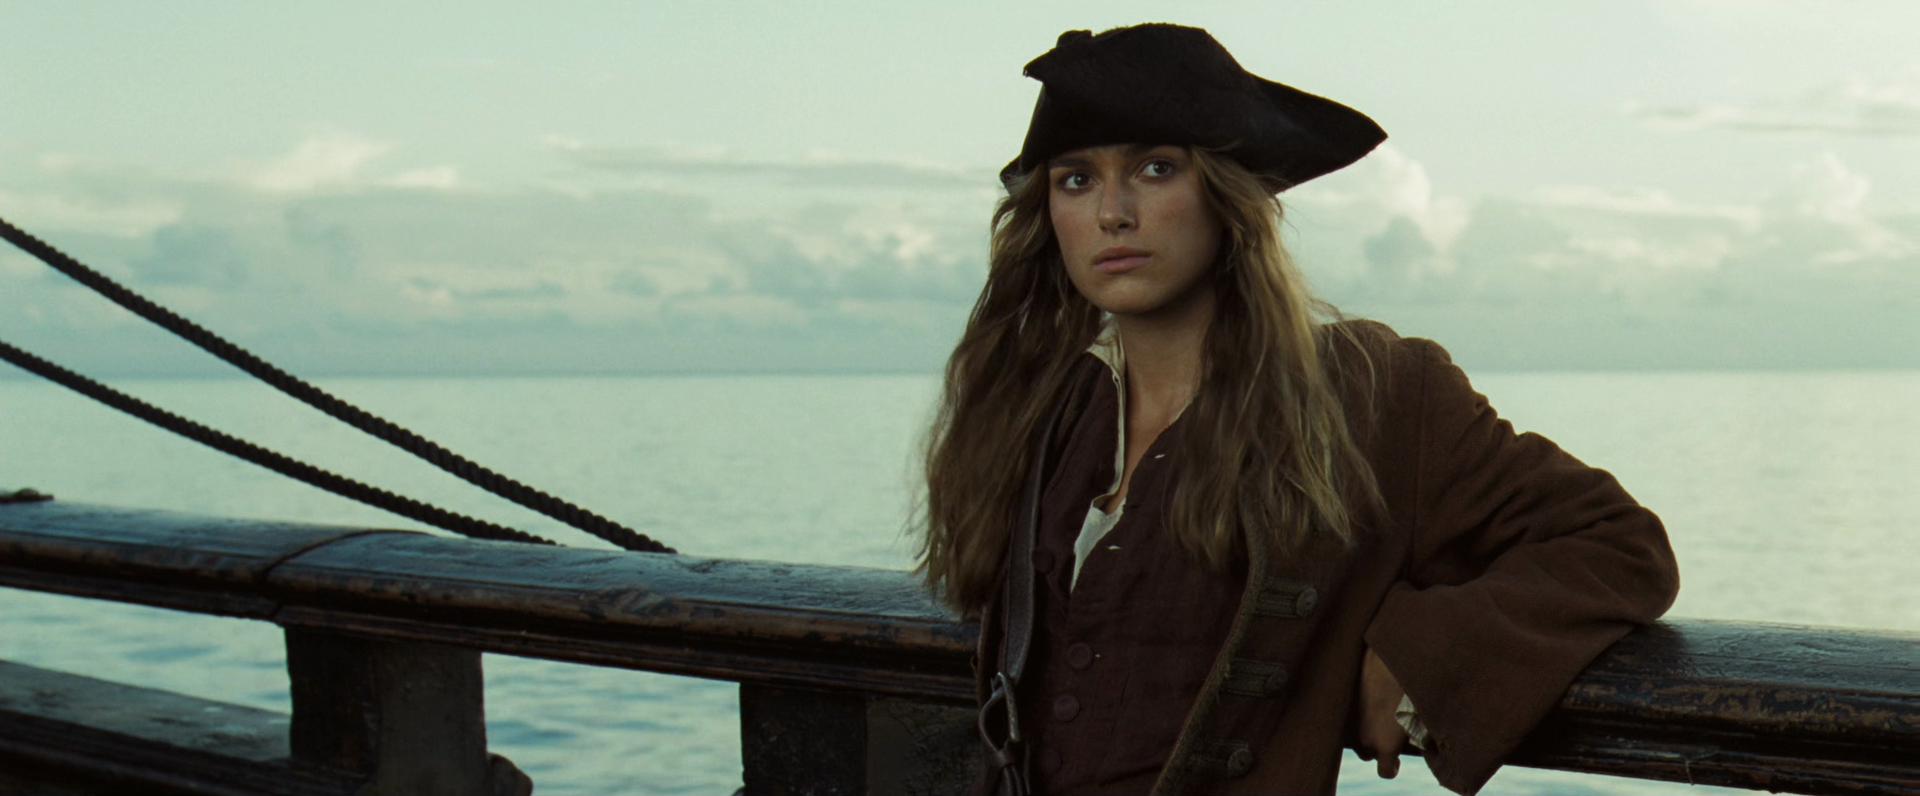 Elizabeth Swann (Keira Knightley) plans her next move in Pirates of the Caribbean: Dead Man's Chest (2006).